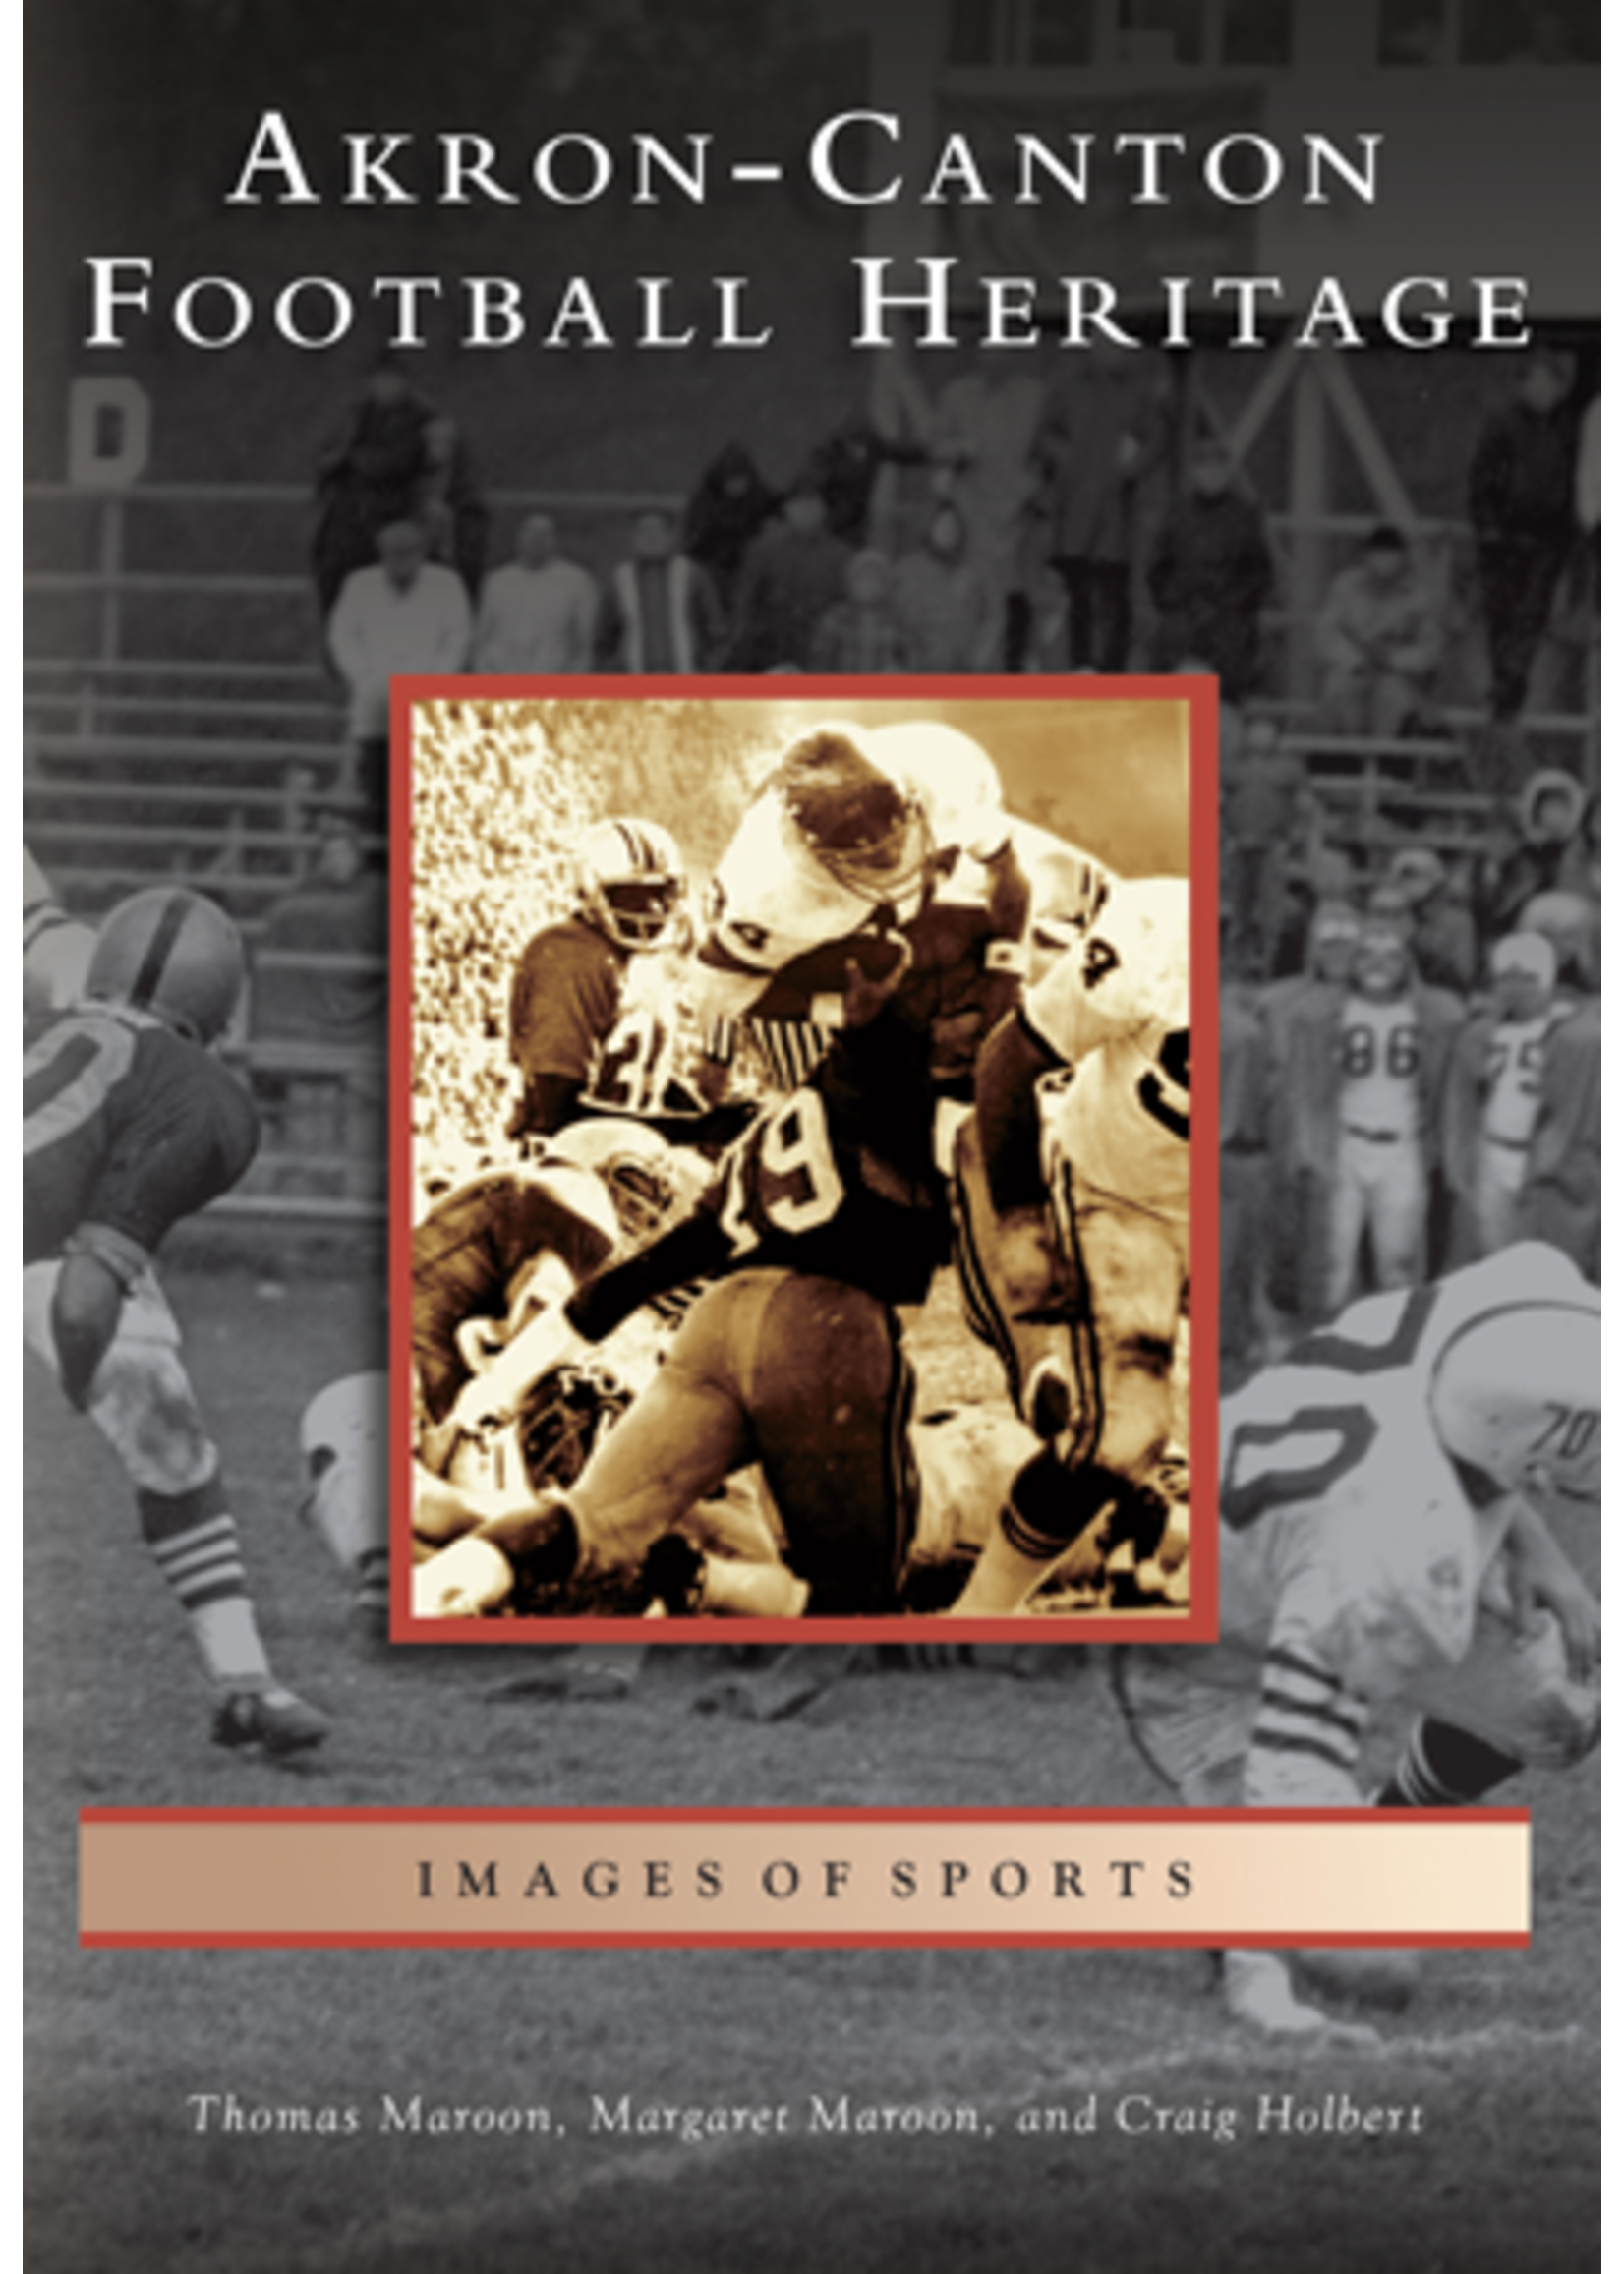 IMAGES OF SPORTS-AKRON-CANTON FOOTBALL HERITAGE